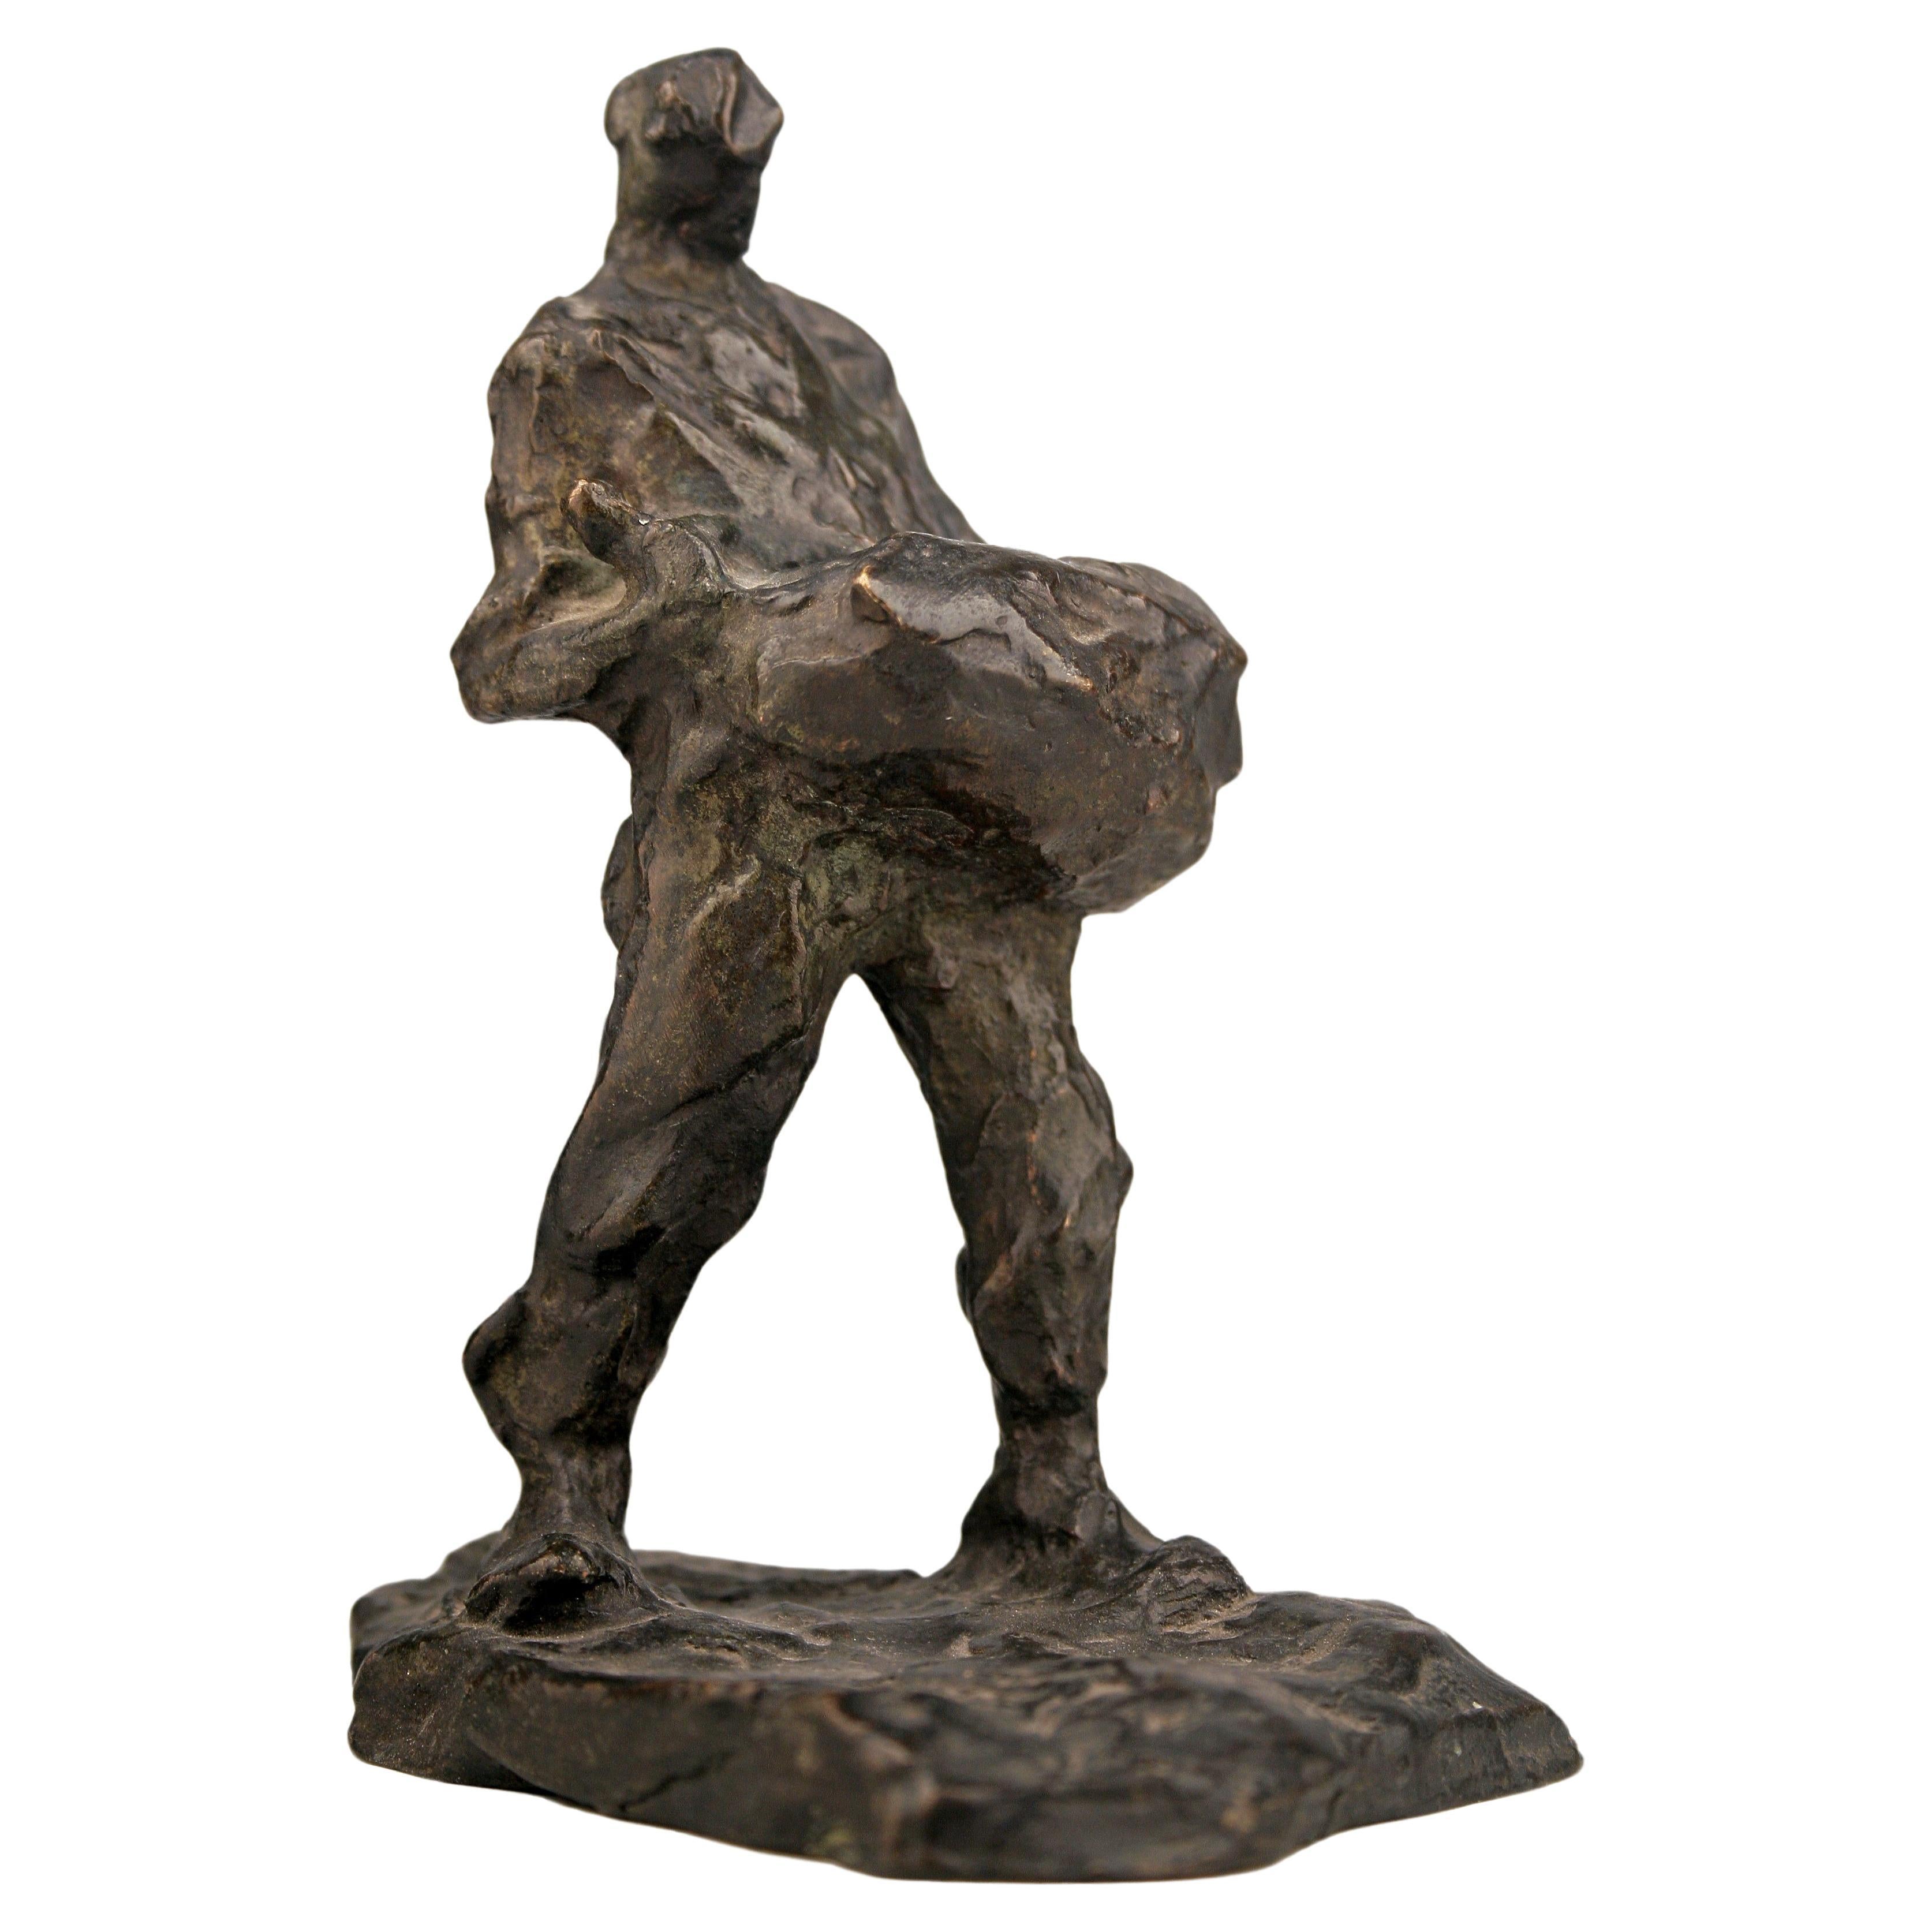 Early 20th Century Bronze Sculpture of Carrying Man by Belgian Sculptor Demanet